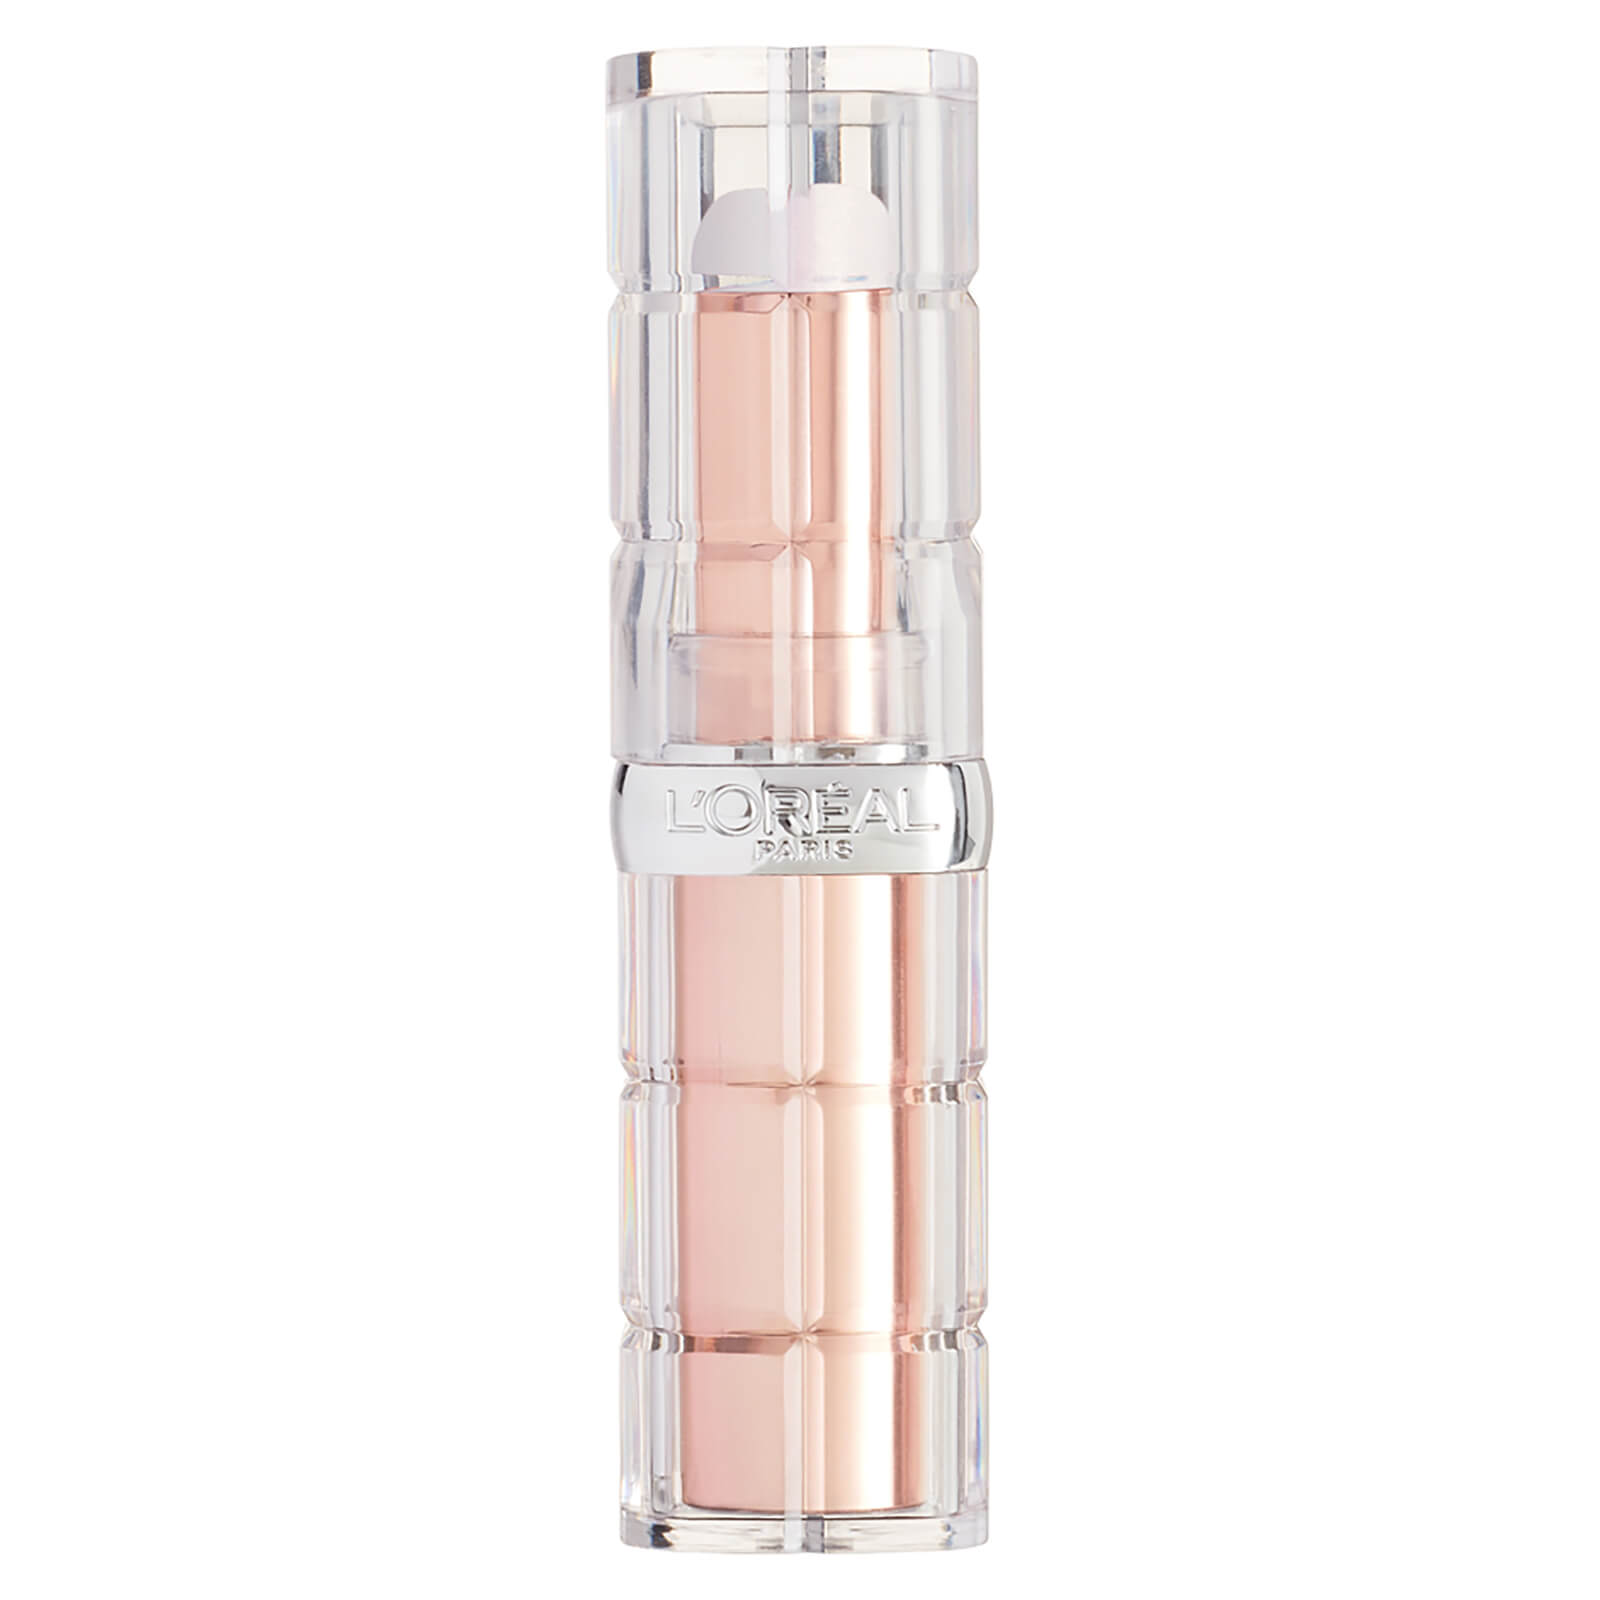 L'Oreal Paris Color Riche Plump and Shine Lipstick (Various Shades) - 8 103 Lychee